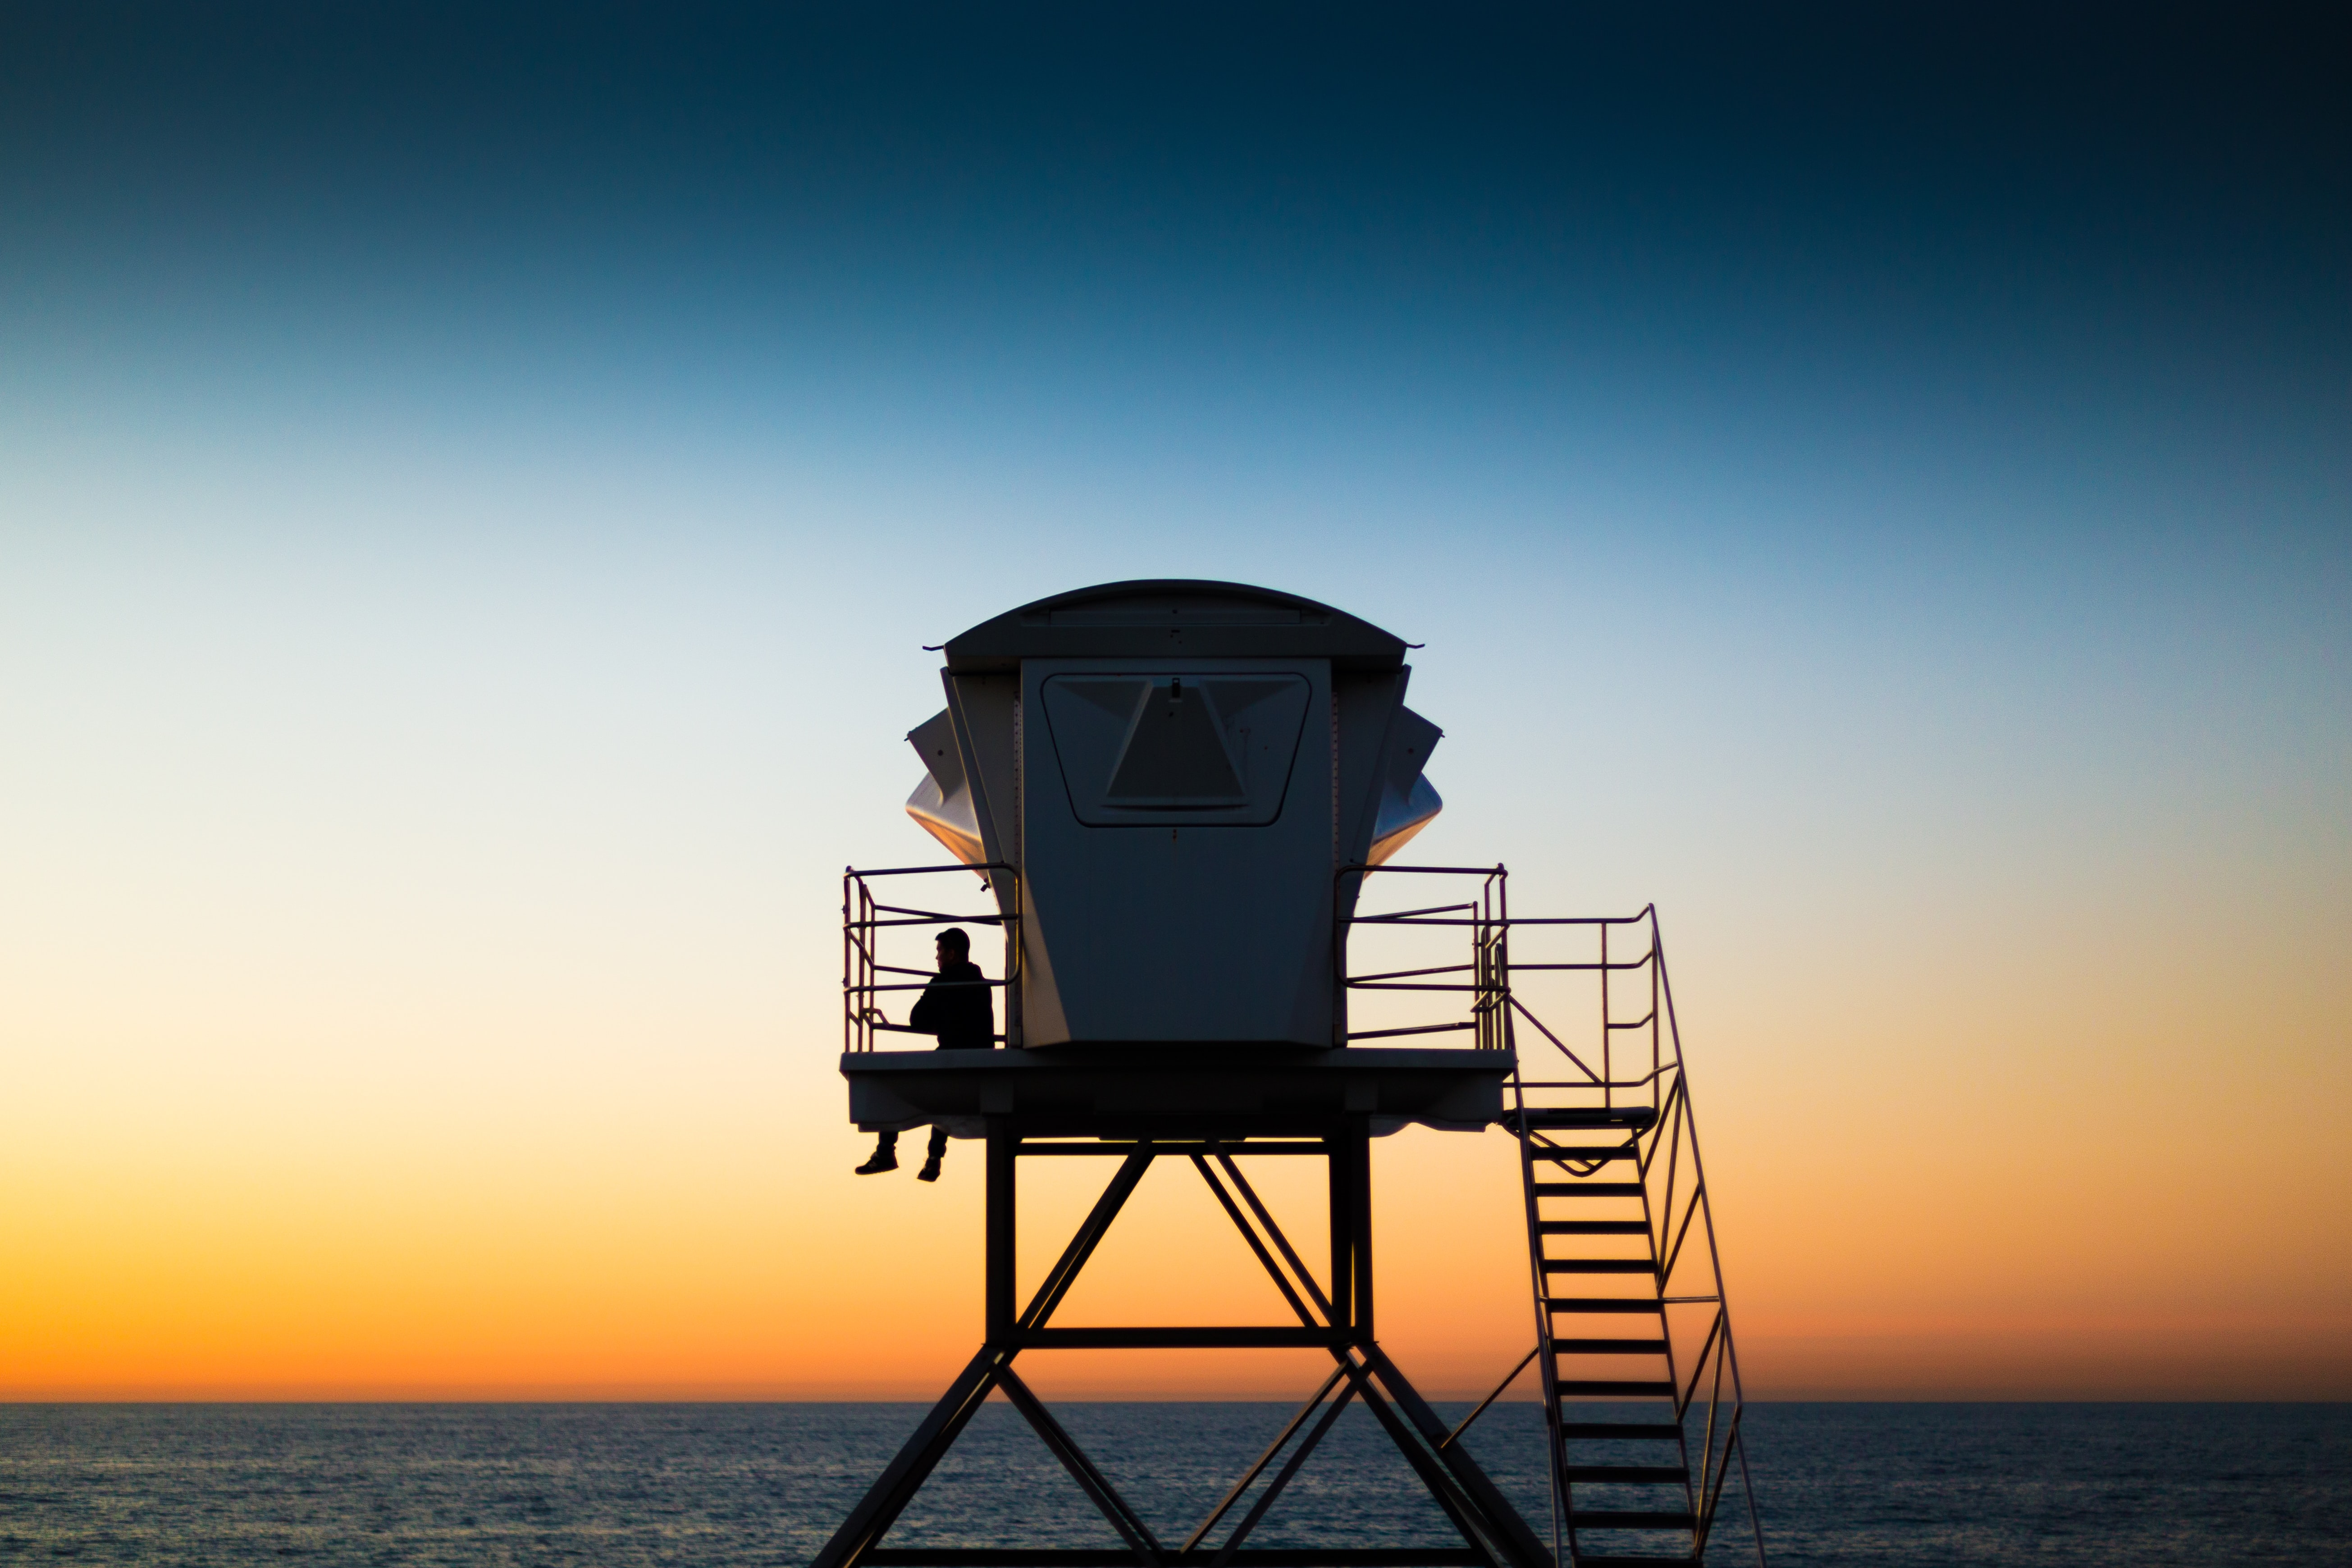 A silhouette sits atop a lifeguard tower with an orange, white and blue sunset over the ocean in the background 